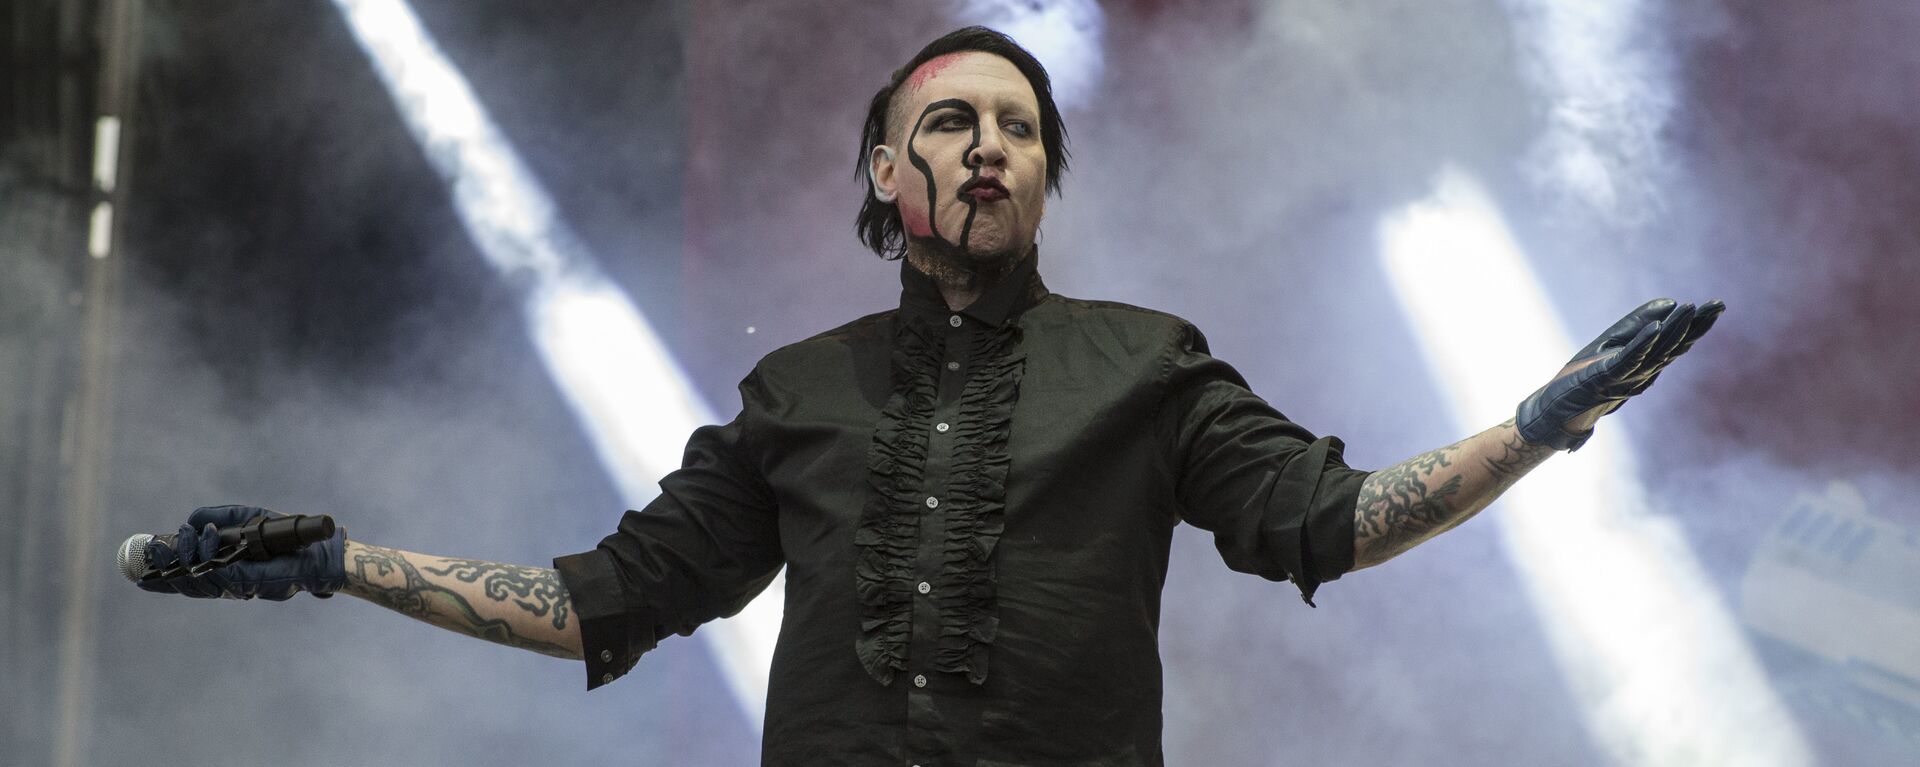 U.S. singer Marilyn Manson performs at the Hell and Heaven music festival in Mexico City, Saturday, May 5, 2018 - Sputnik International, 1920, 01.02.2021